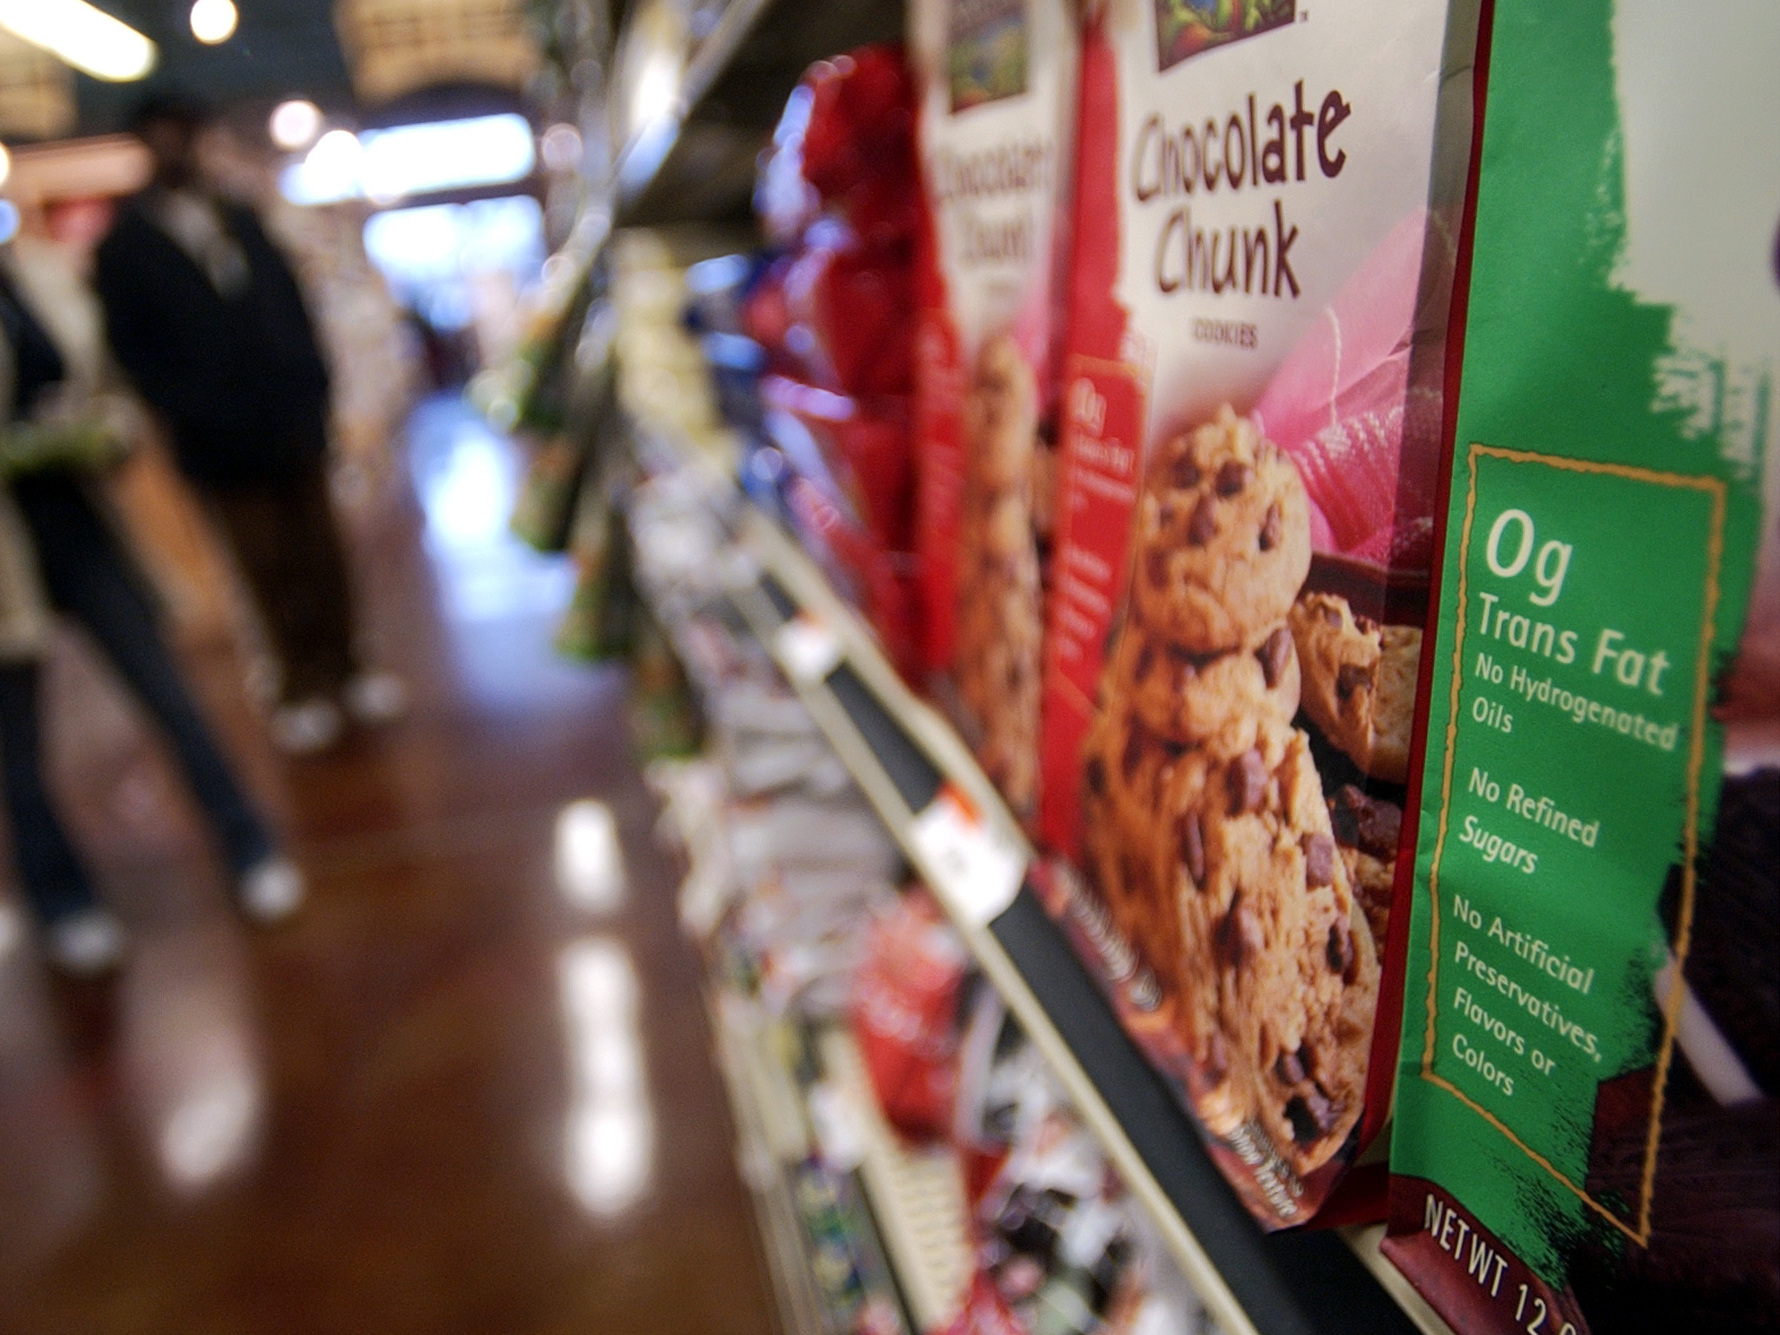 About 84 percent of food products that contain trans fats still carry a "zero gram" label, which may mislead consumers, researchers say. Photo: Tony Dejak/AP